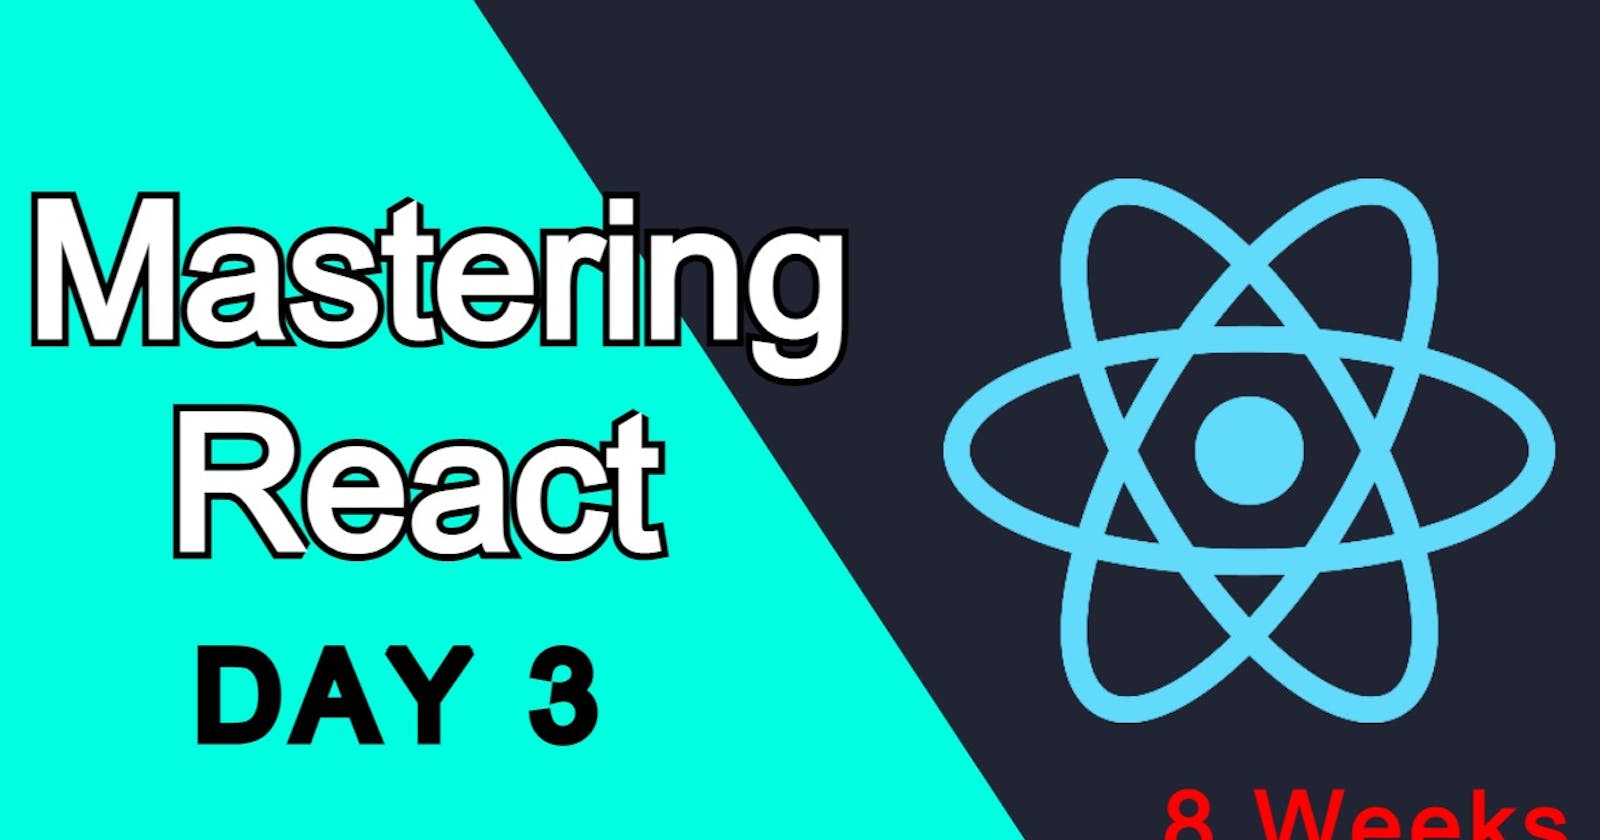 Mastering React in 8 weeks - Day 3